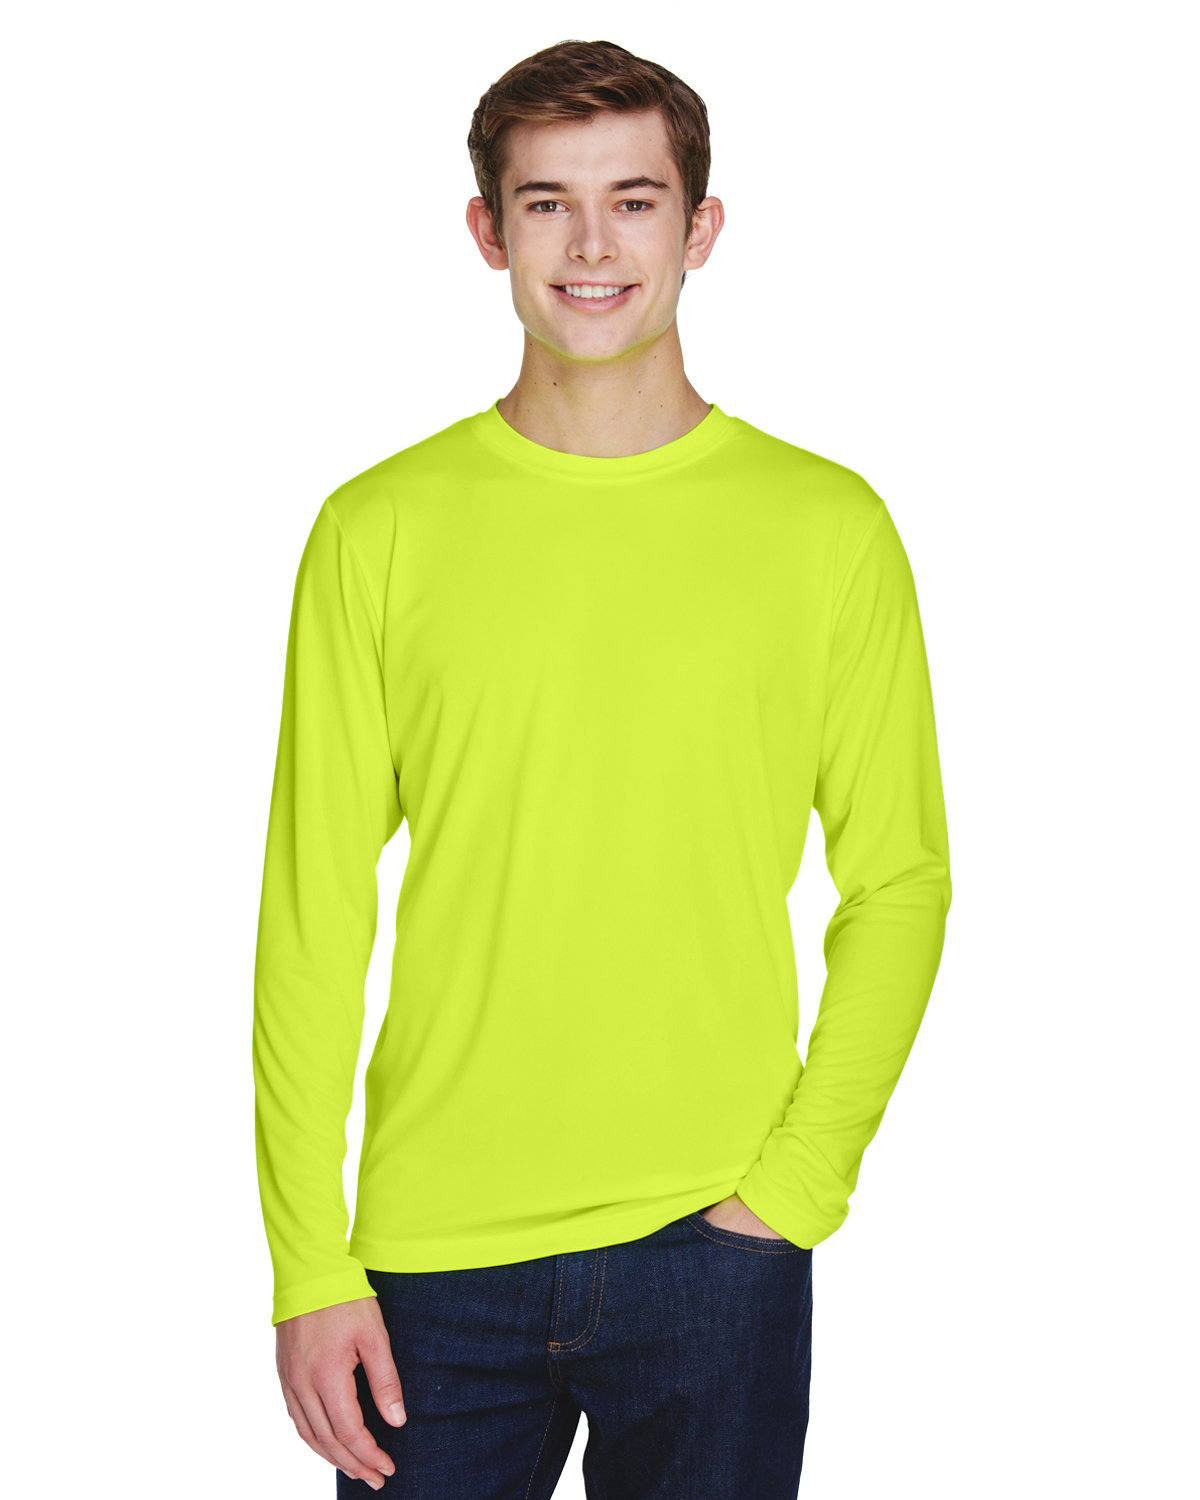 Team 365 Men's Zone Performance Long-Sleeve T-Shirt SAFETY YELLOW 